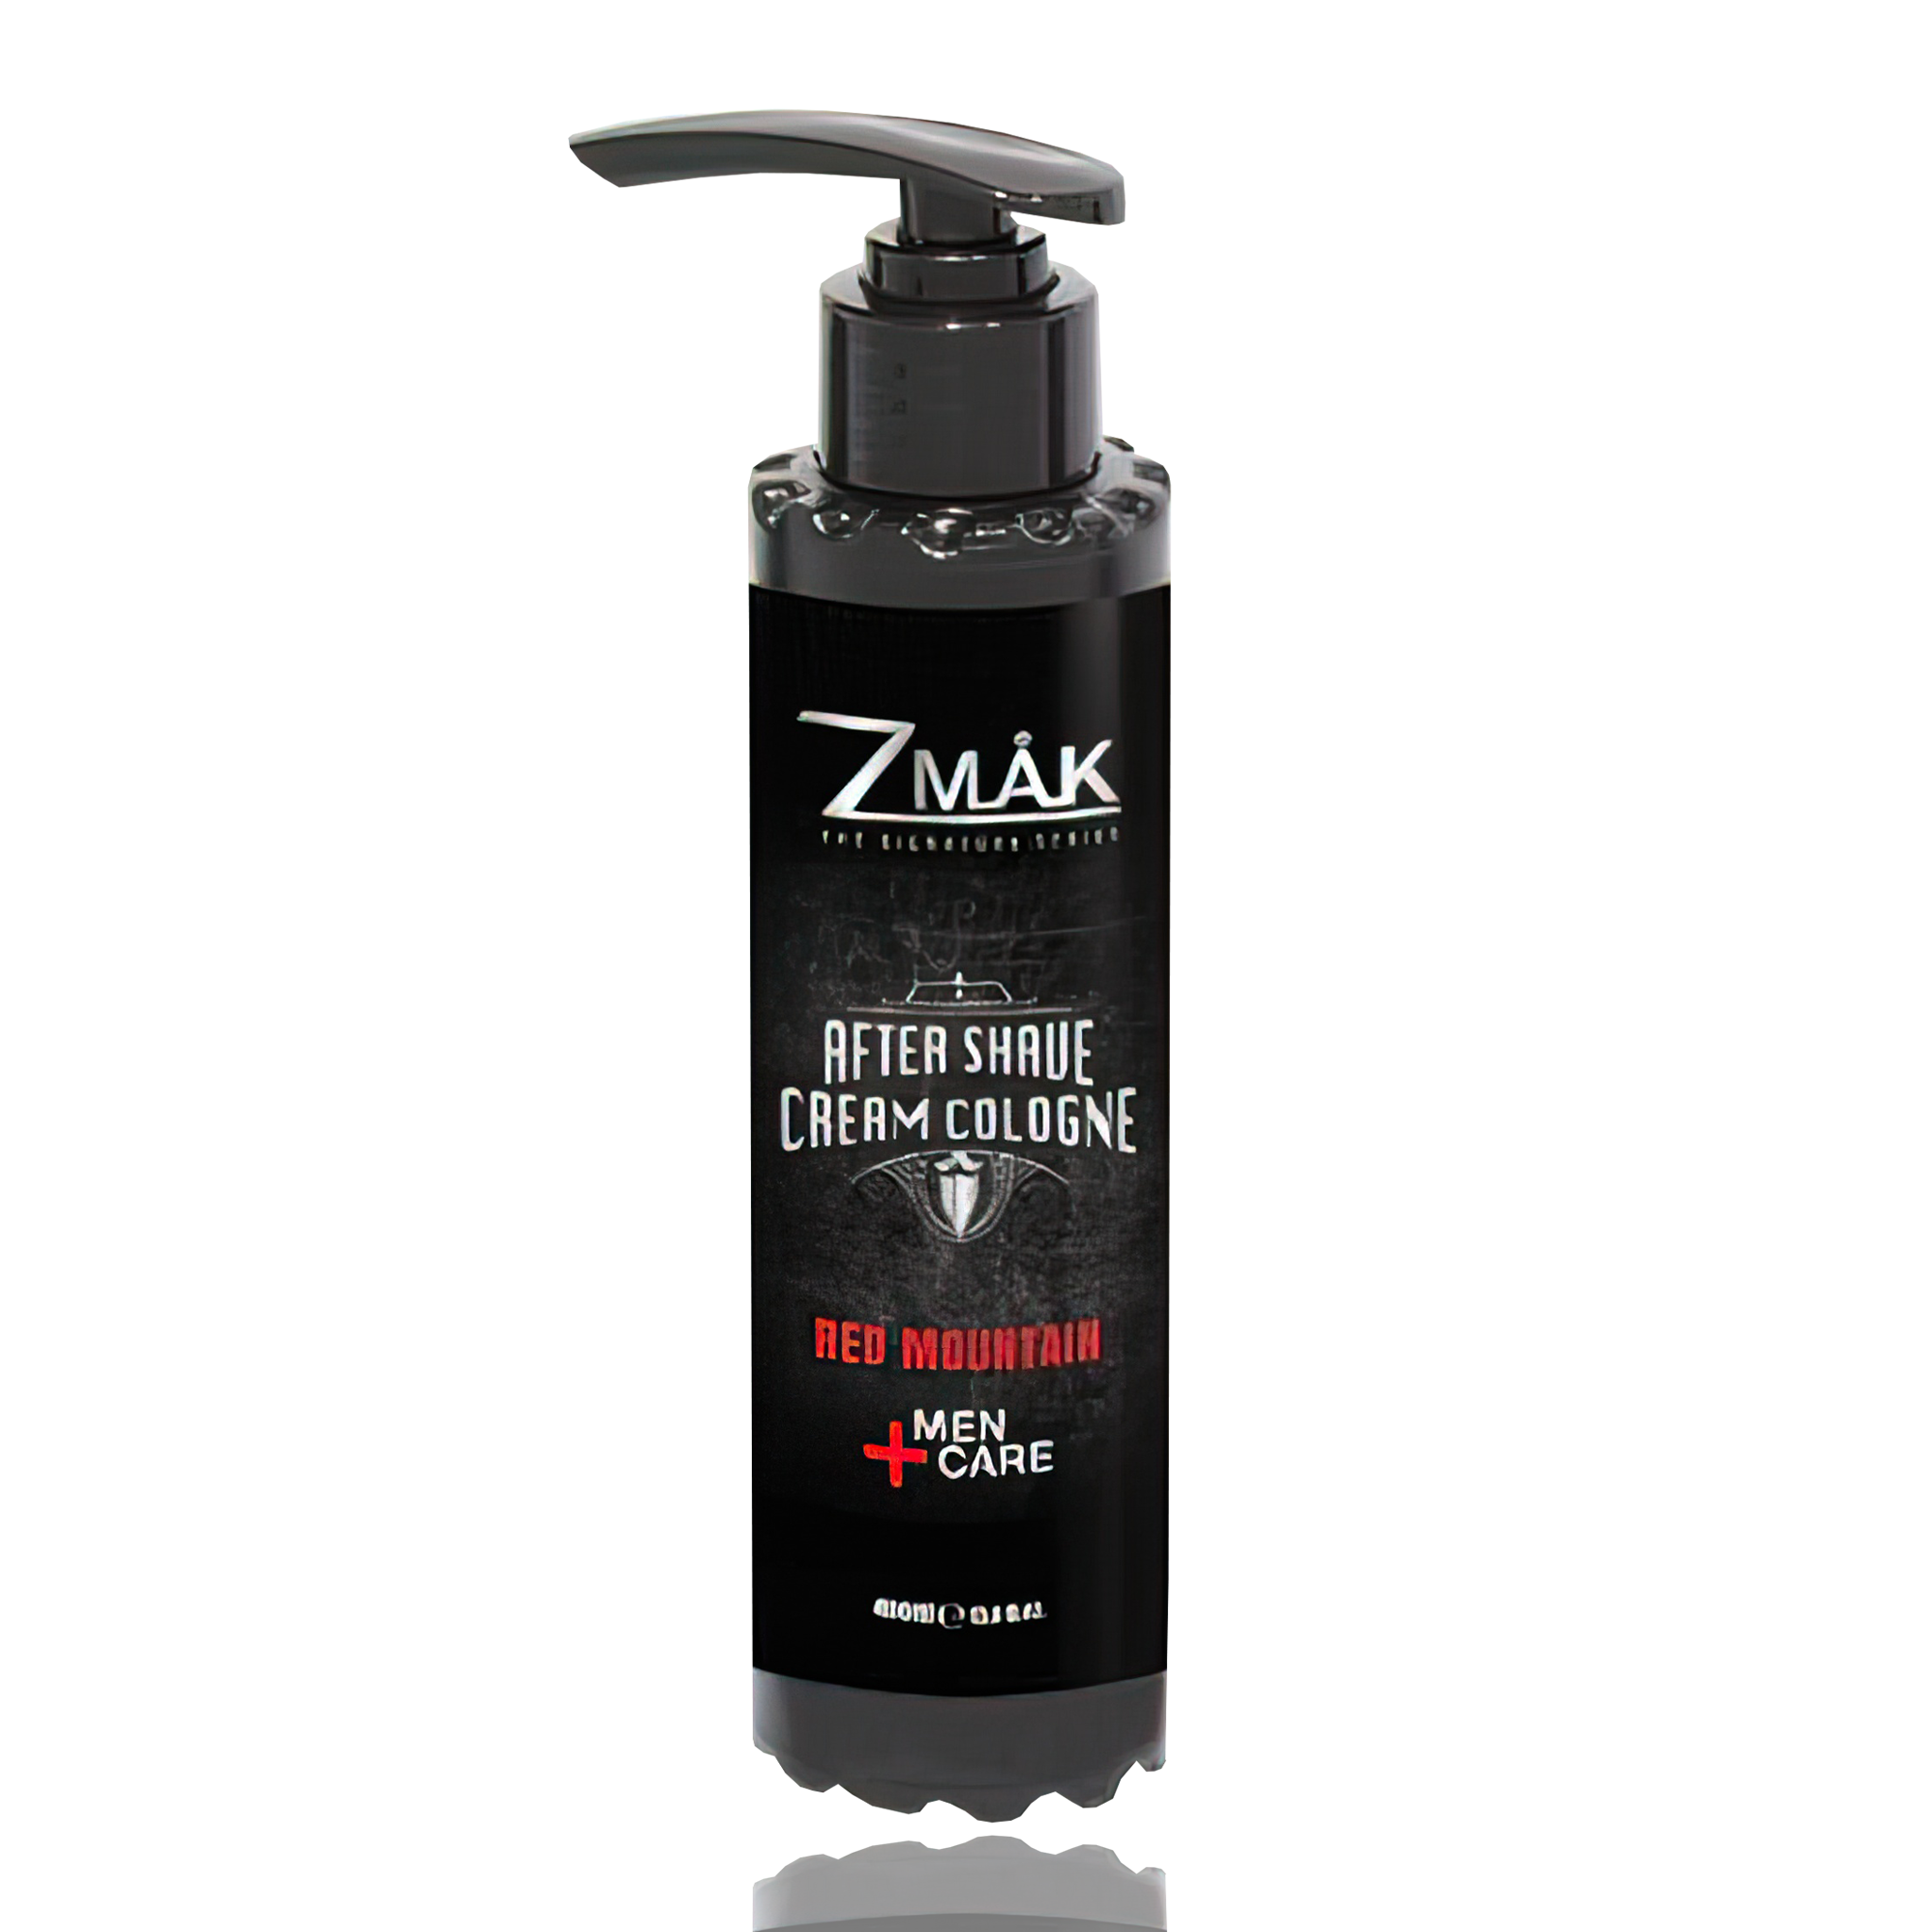 After Shave Cream Cologne - Red Mountain - 13.86 fl oz. - ZMAK The Signature Series